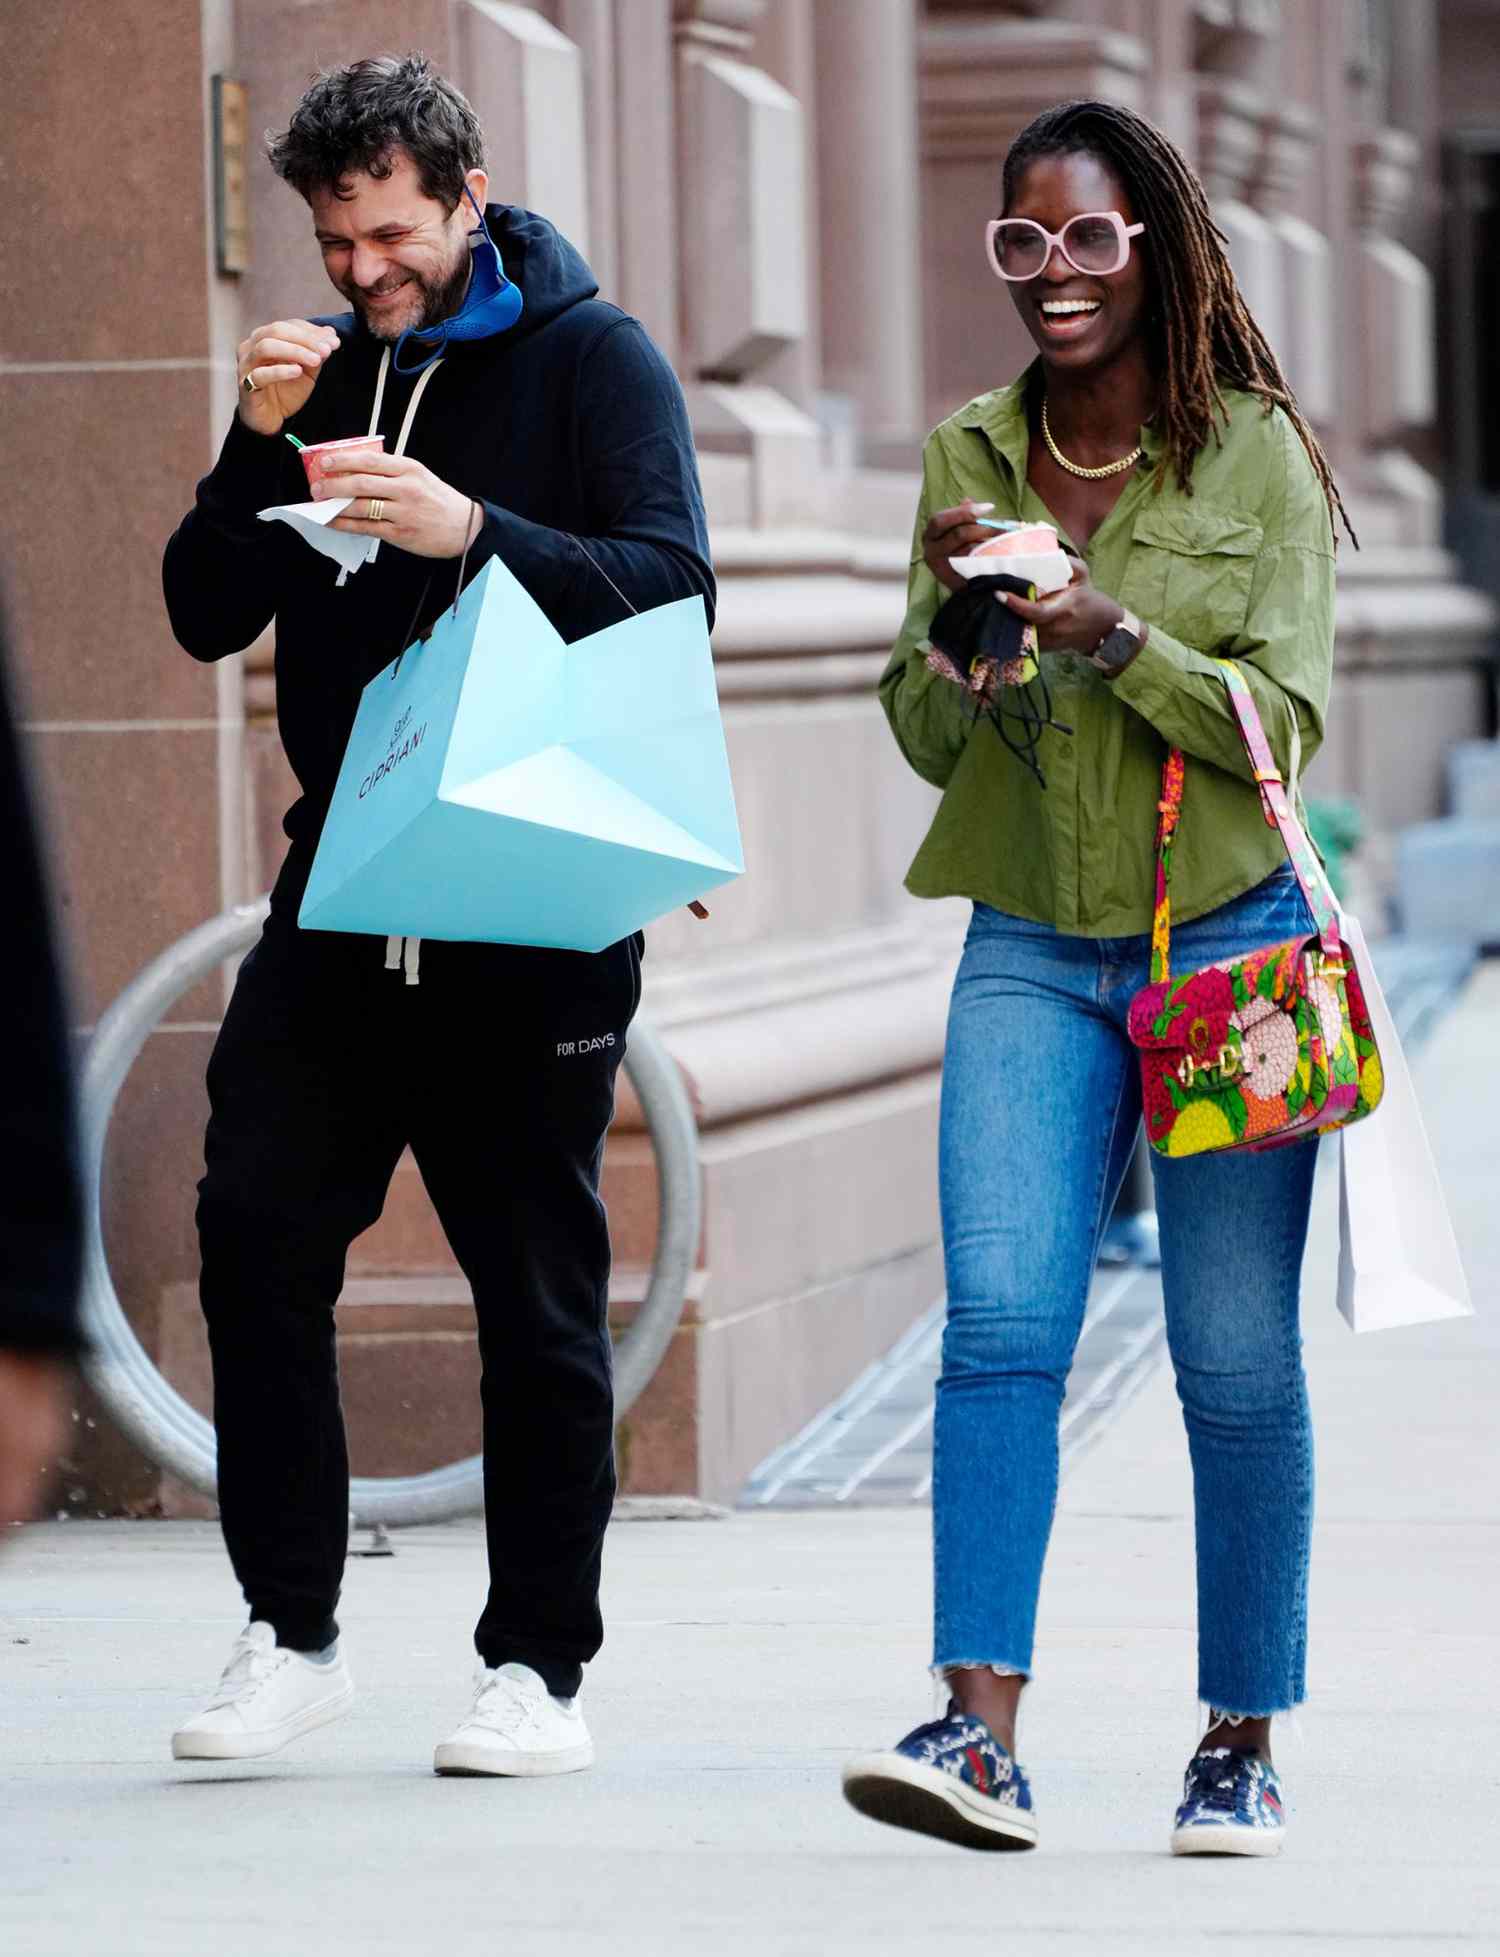 Joshua Jackson and Jodie Turner-Smith are seen laughing and walking in Soho on April 05, 2021 in New York City